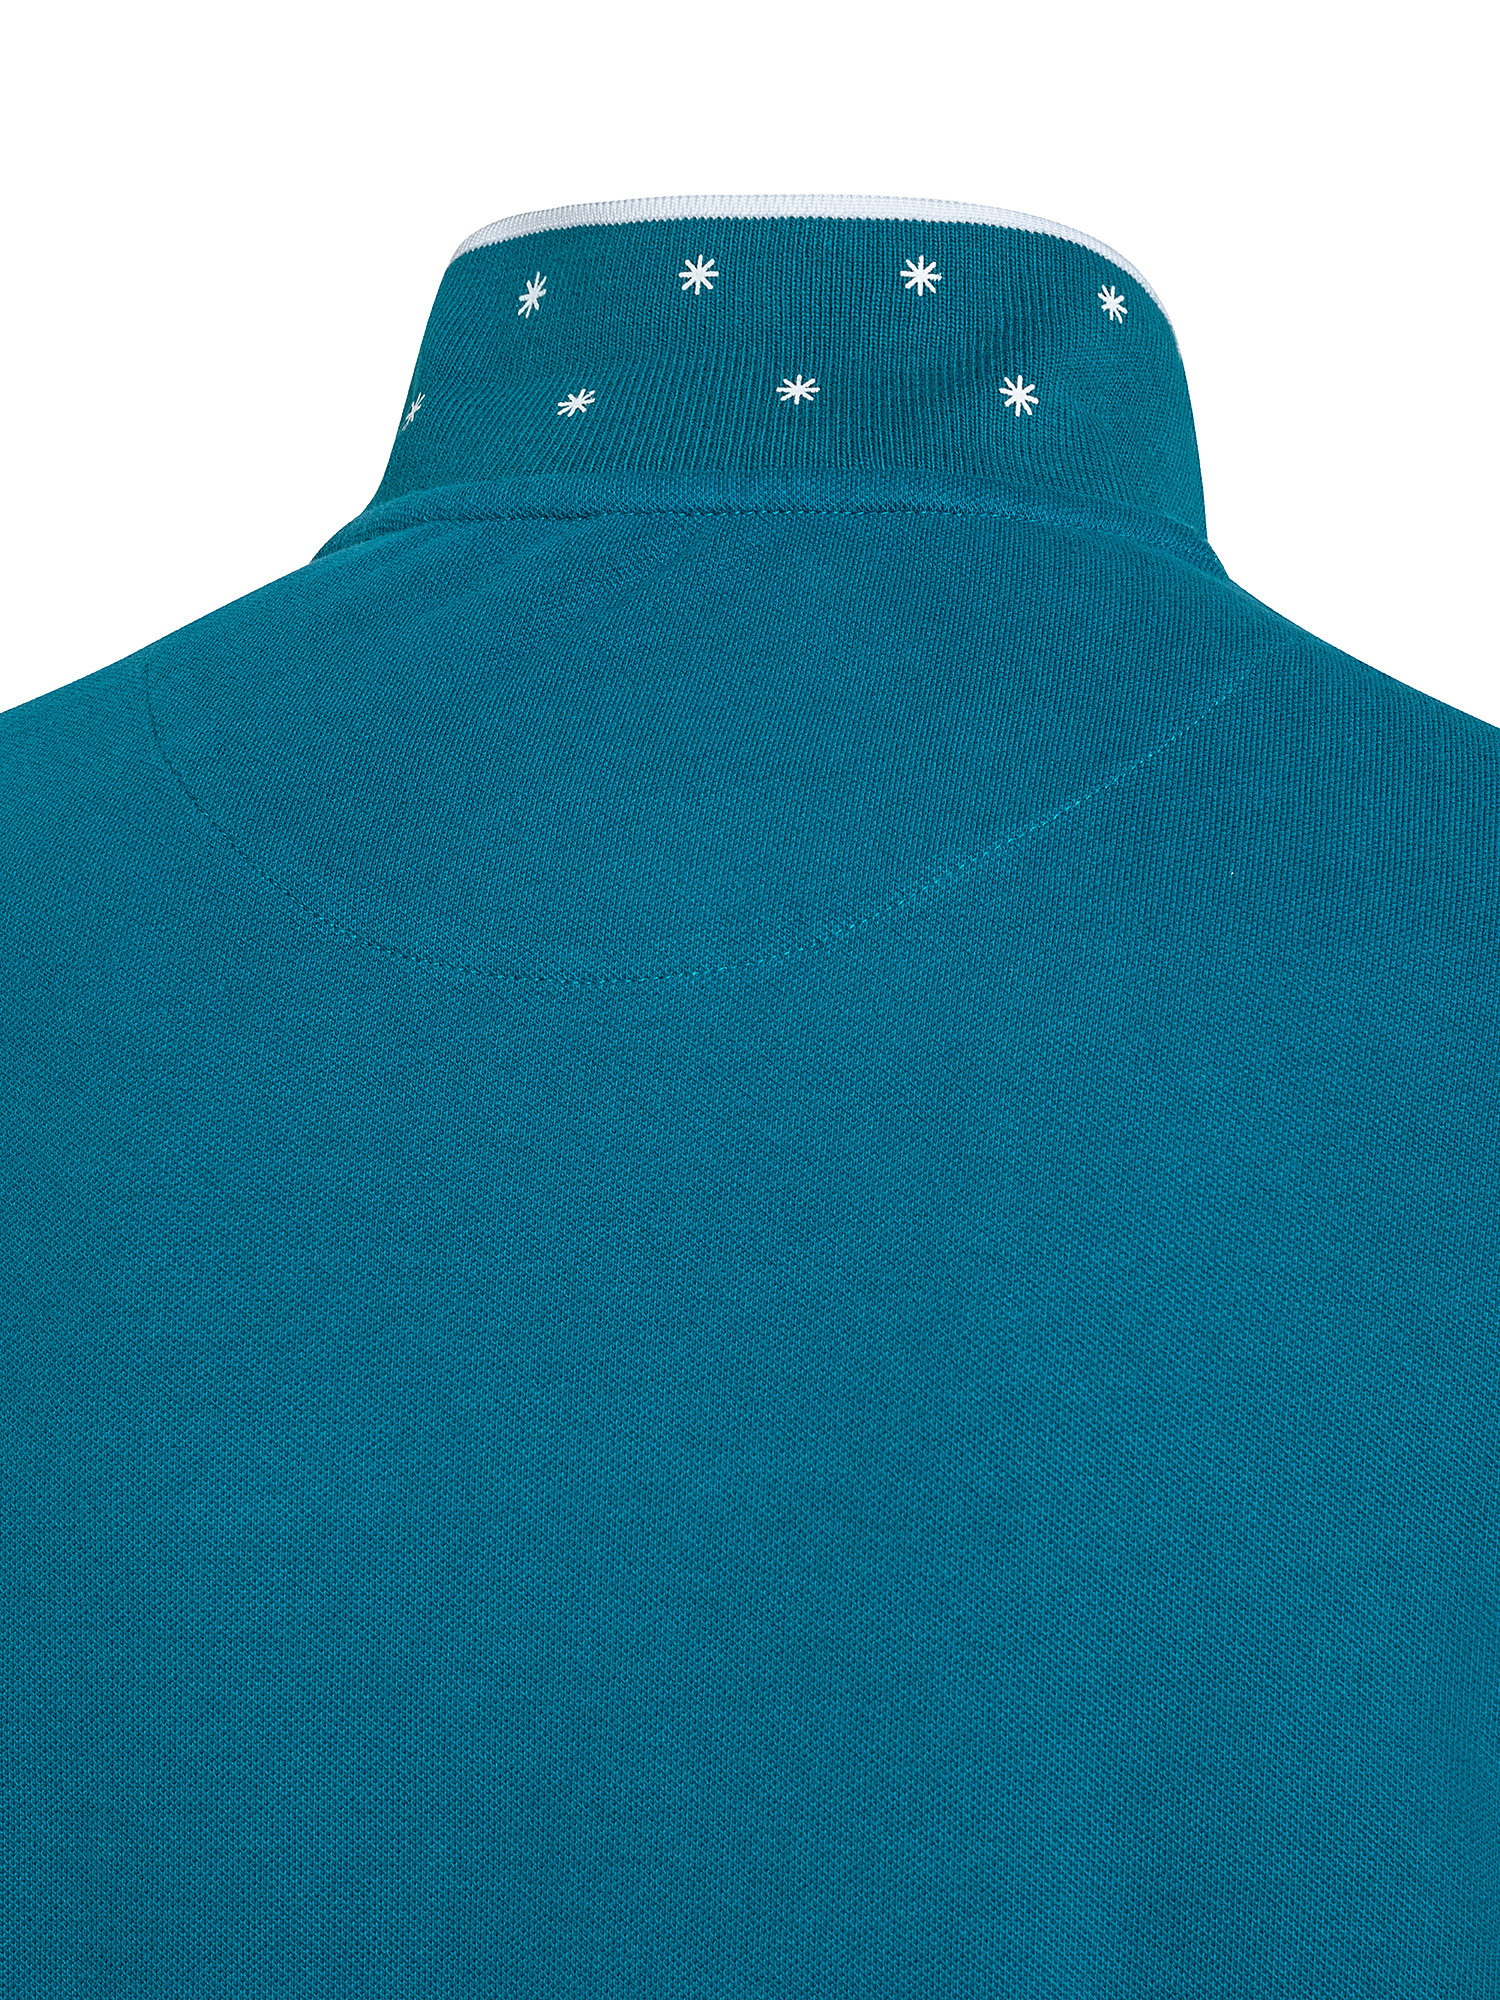 Short sleeve polo shirt, Green teal, large image number 2